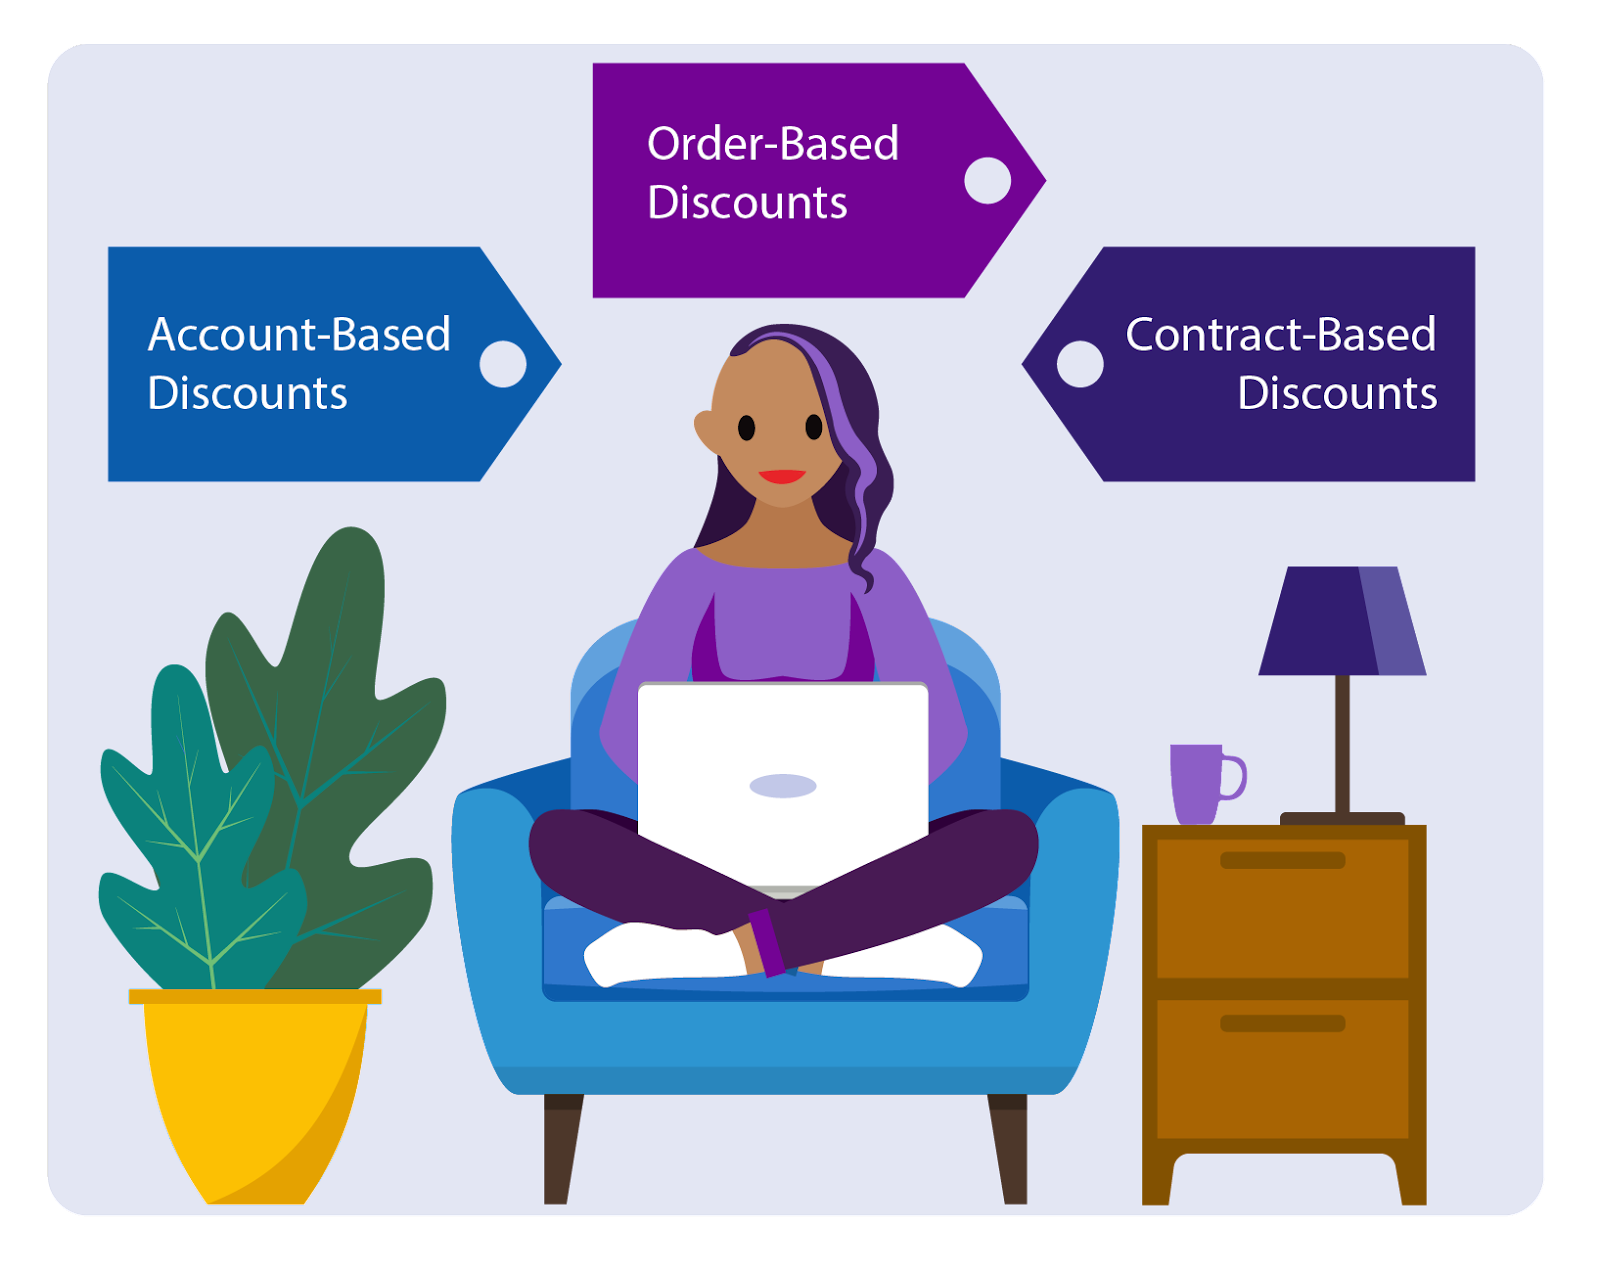 The three types of discounts: order-based, account-based, and contract-based.